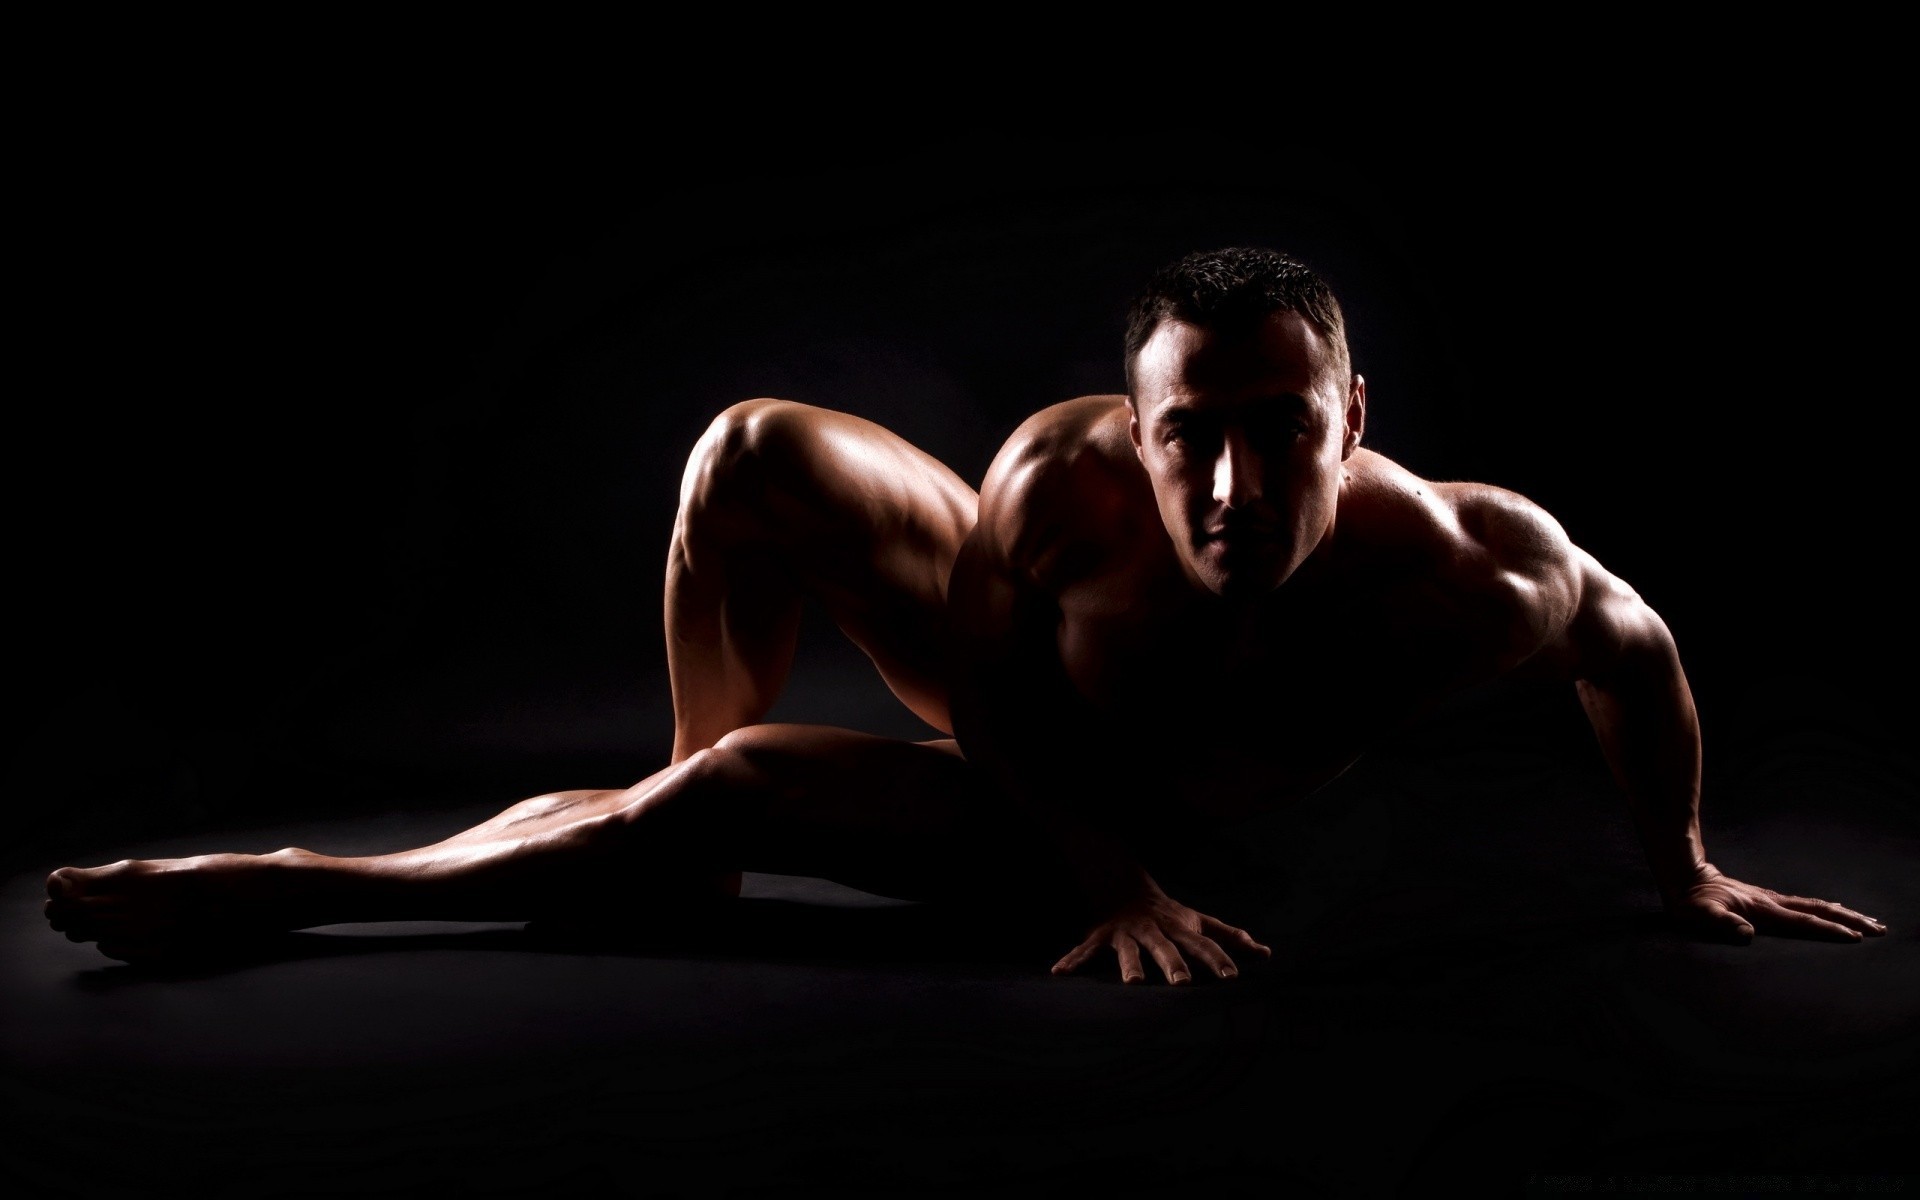 fitness nude one ballet portrait adult athlete strength man shadow ballerina body shirtless position dark sexy erotic exercise model